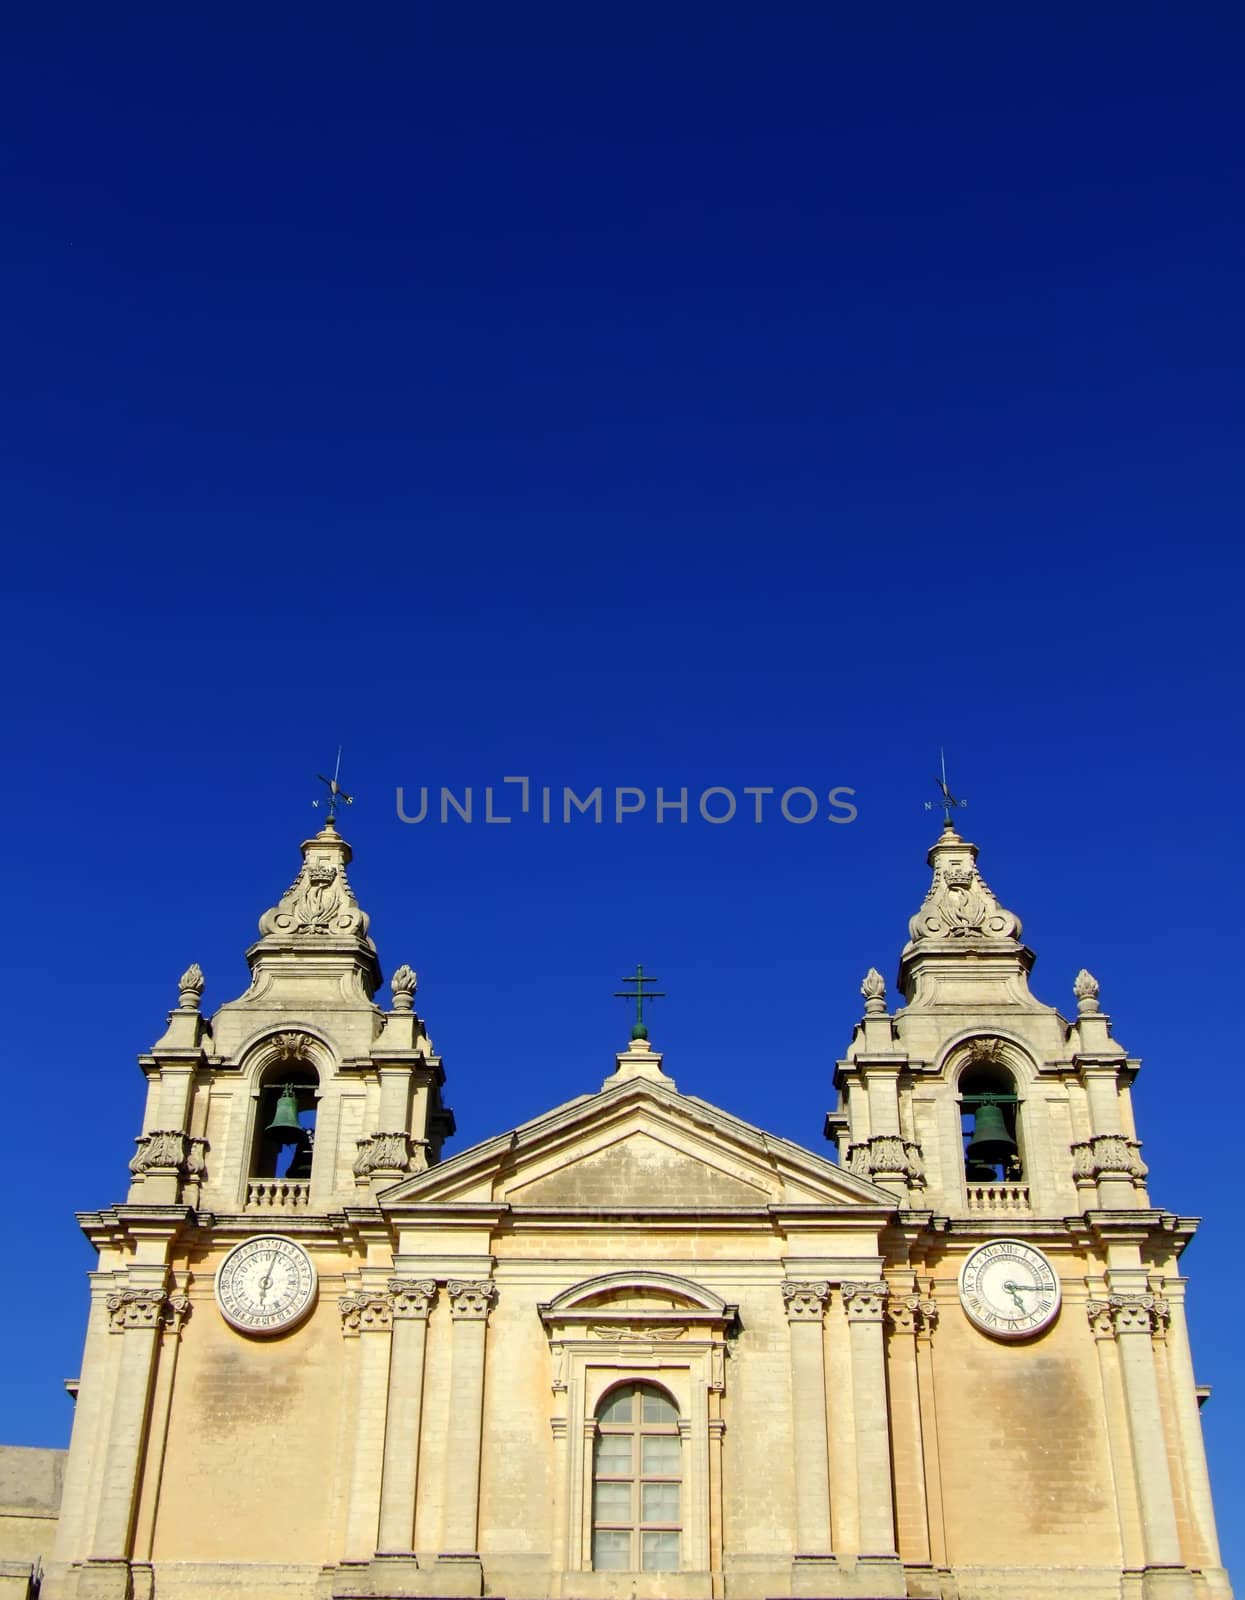 Facade of the Cathedral of Malta in the old city of Mdina